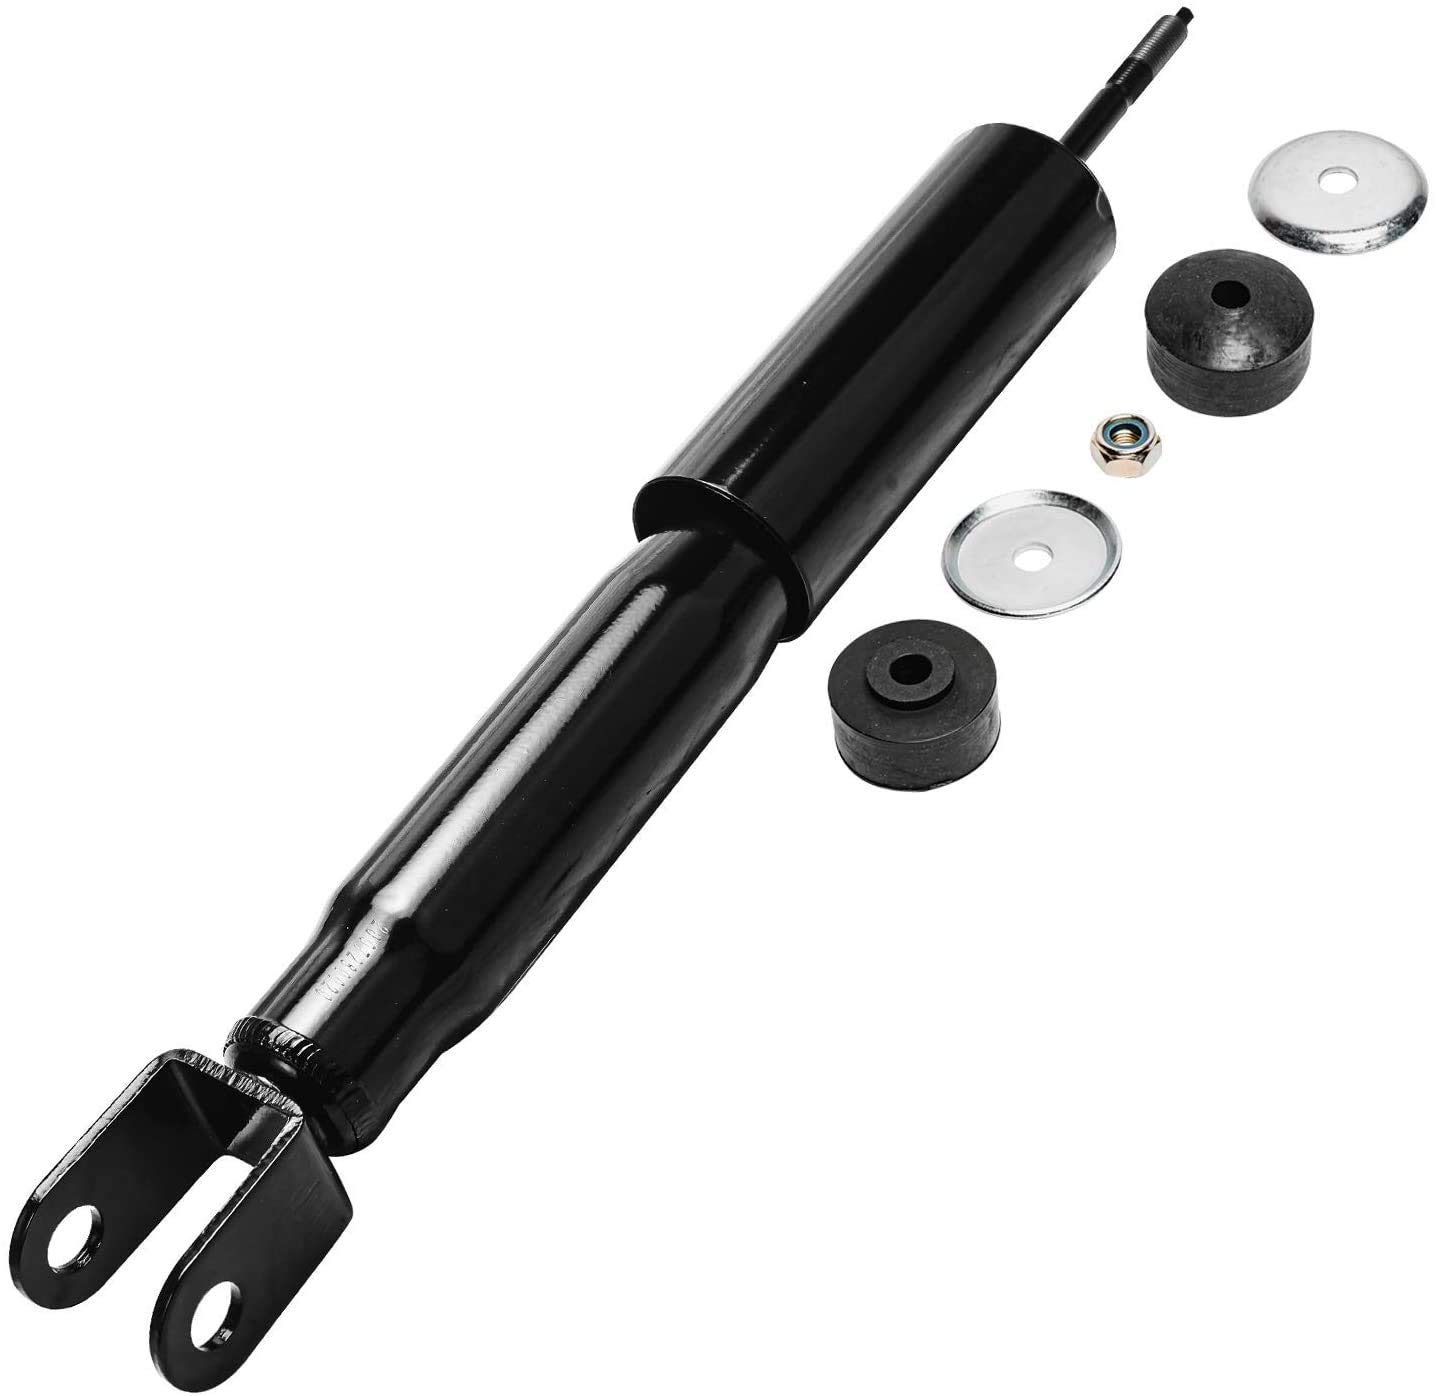 Detroit Axle - Front Shocks for Chevrolet Avalanche Silverado Suburban GMC Sierra Yukon XL 1500 Tahoe Shock Absorbers Assembly Replacement Torsion Bar Suspension ONLY